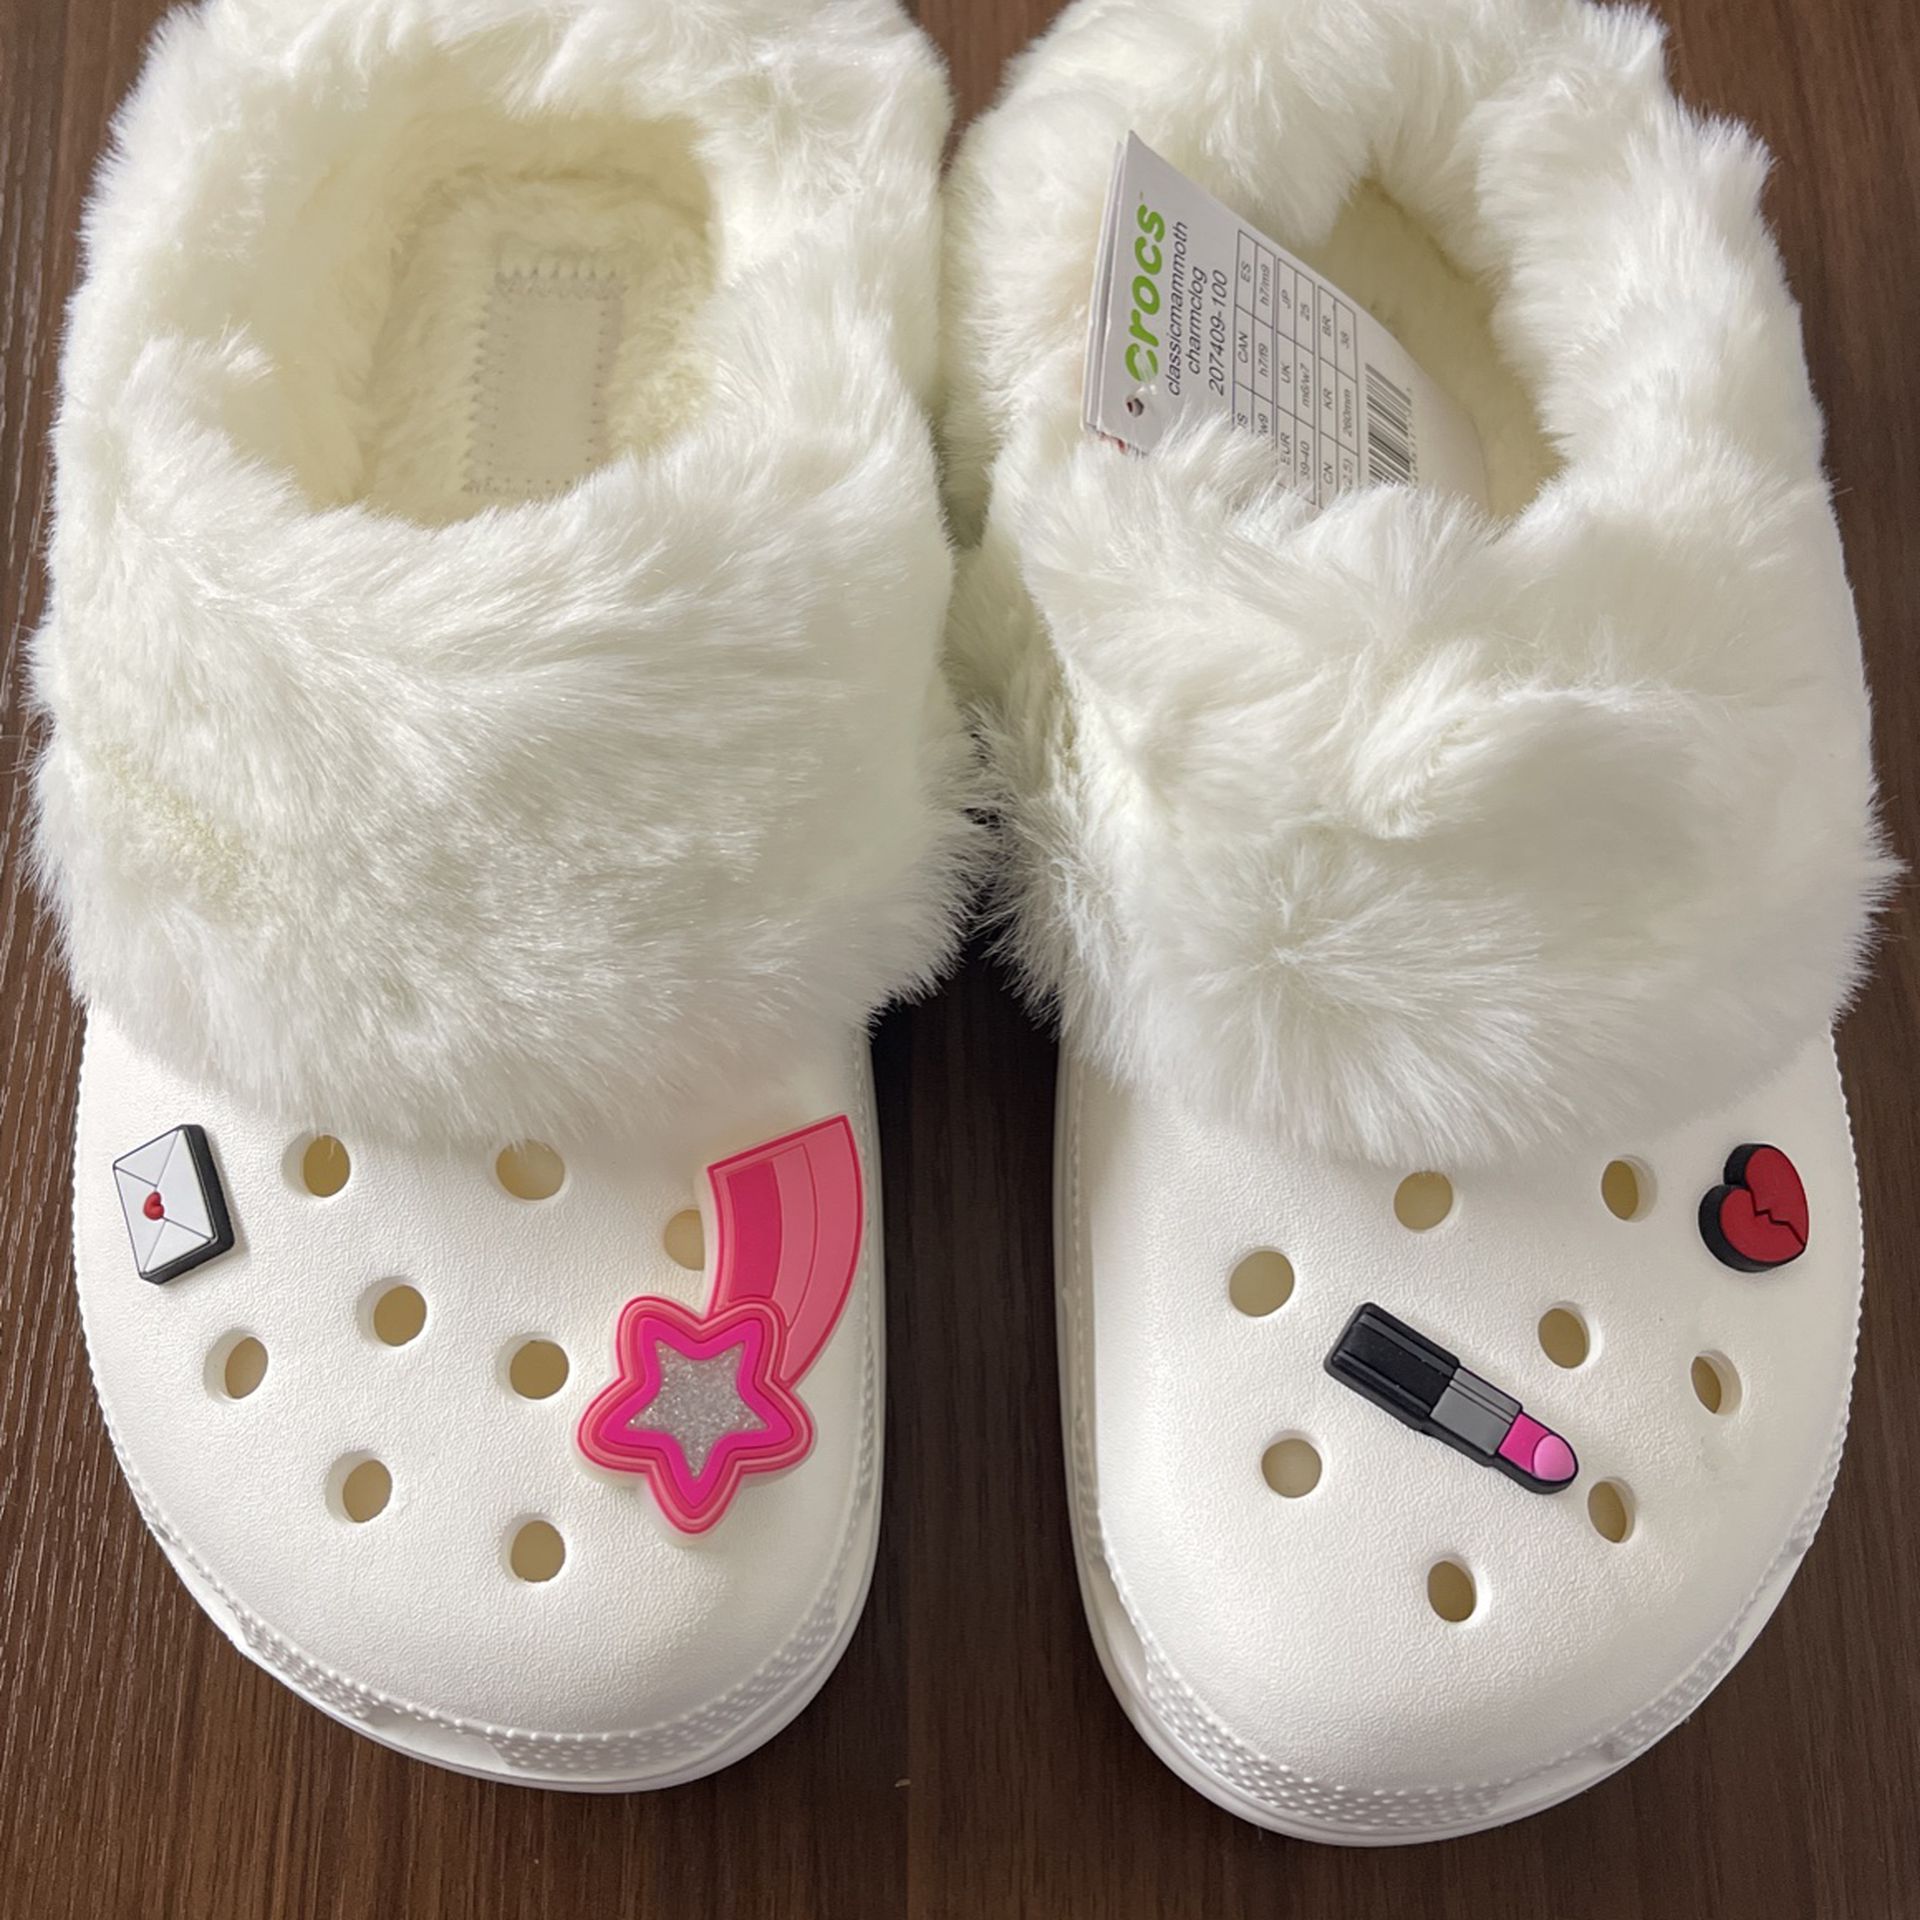 Crocs Unisex Fur Classic Mammoth Charm Clogs White size US W9/M7 for in Lithonia, GA - OfferUp